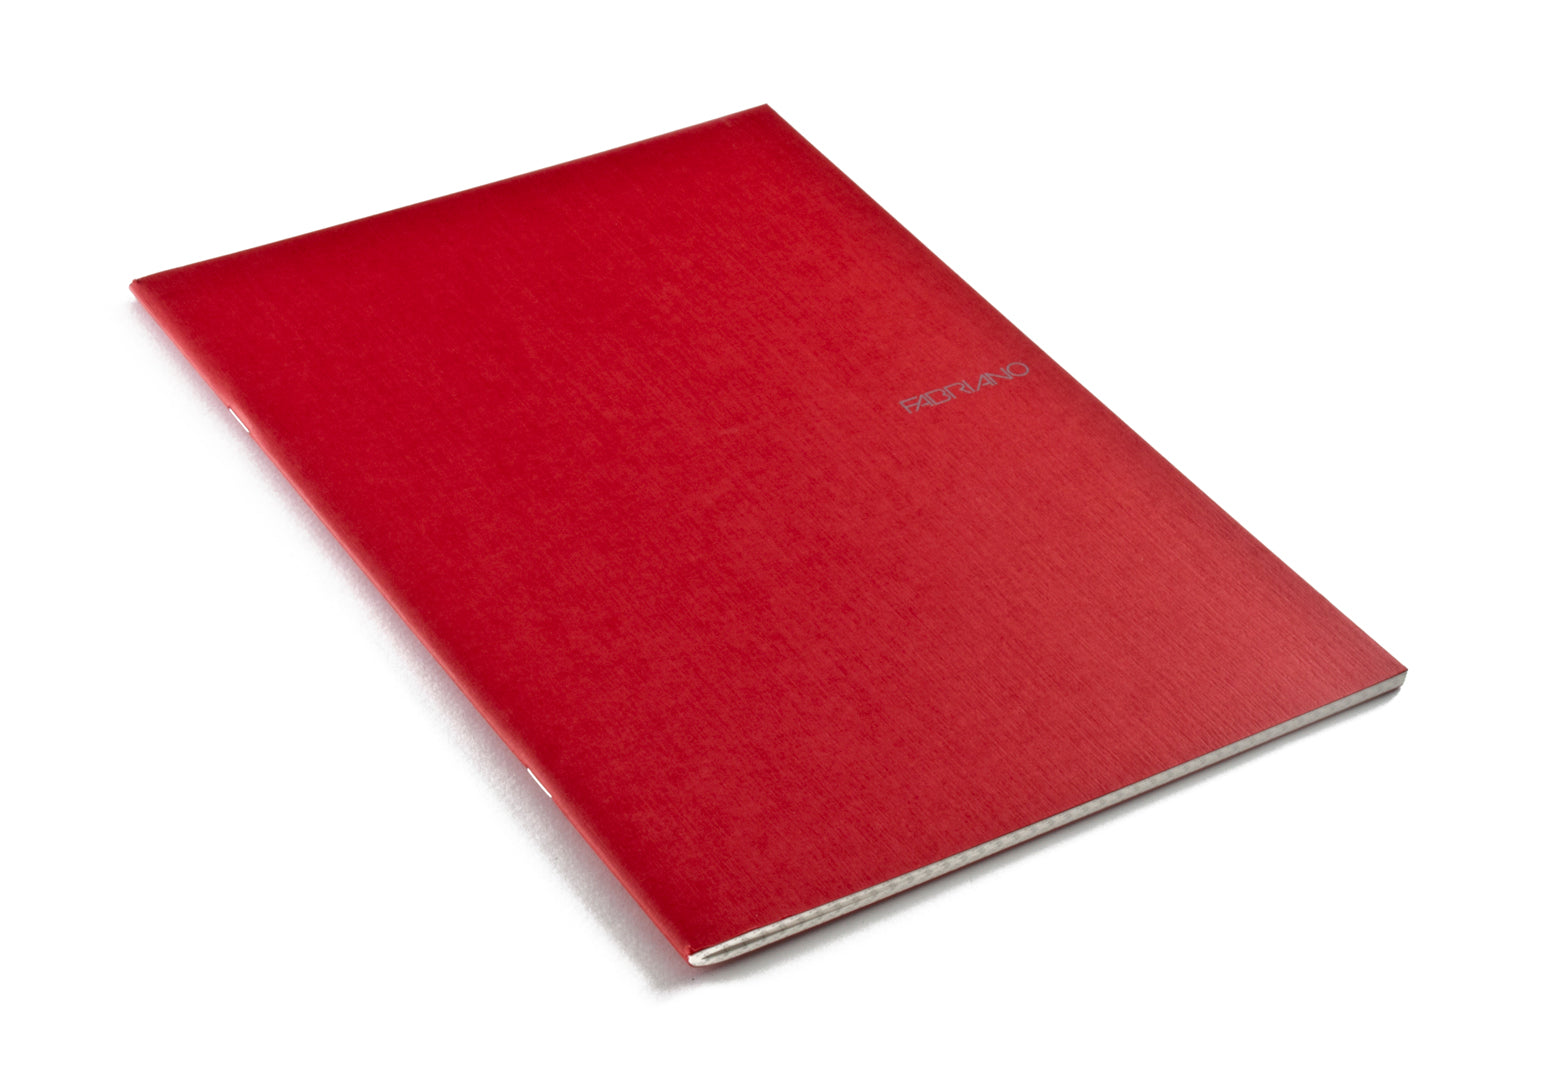 Fabriano EcoQua Notebook Large Staple-Bound Blank 40 Sheets Red